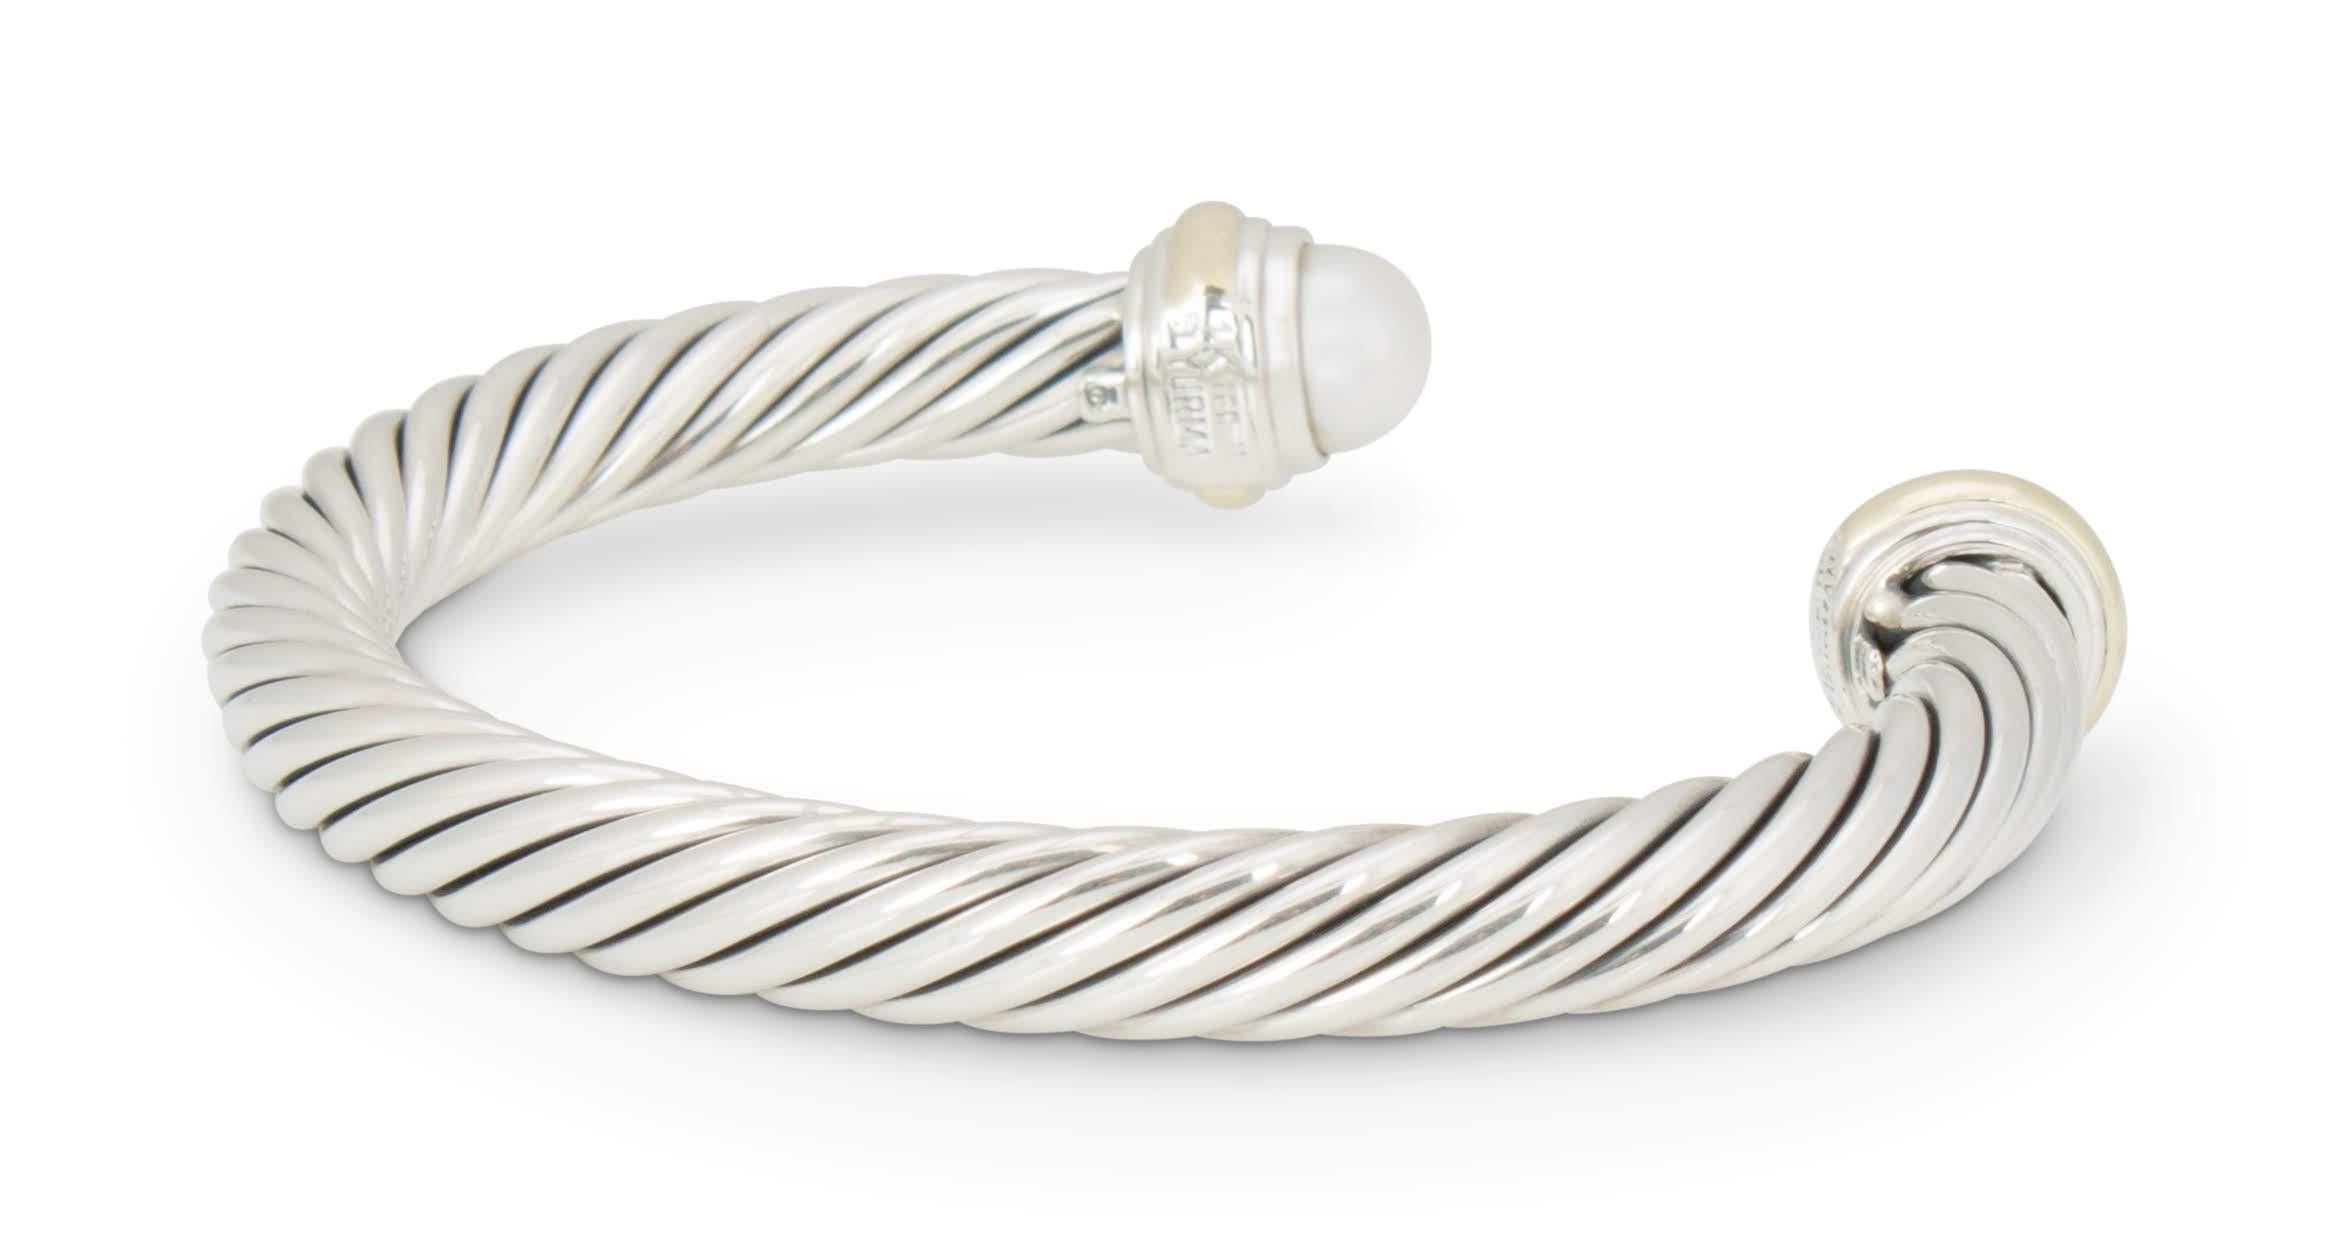 Authentic David Yurman Cable bracelet created in sterling silver with 14 karat gold accents and featuring 2 pearls measuring approximately 7mm each.  Bracelet measures 2 1/4 inches in diameter and can fit up to a size 6 1/2 wrist.  Signed 14K,